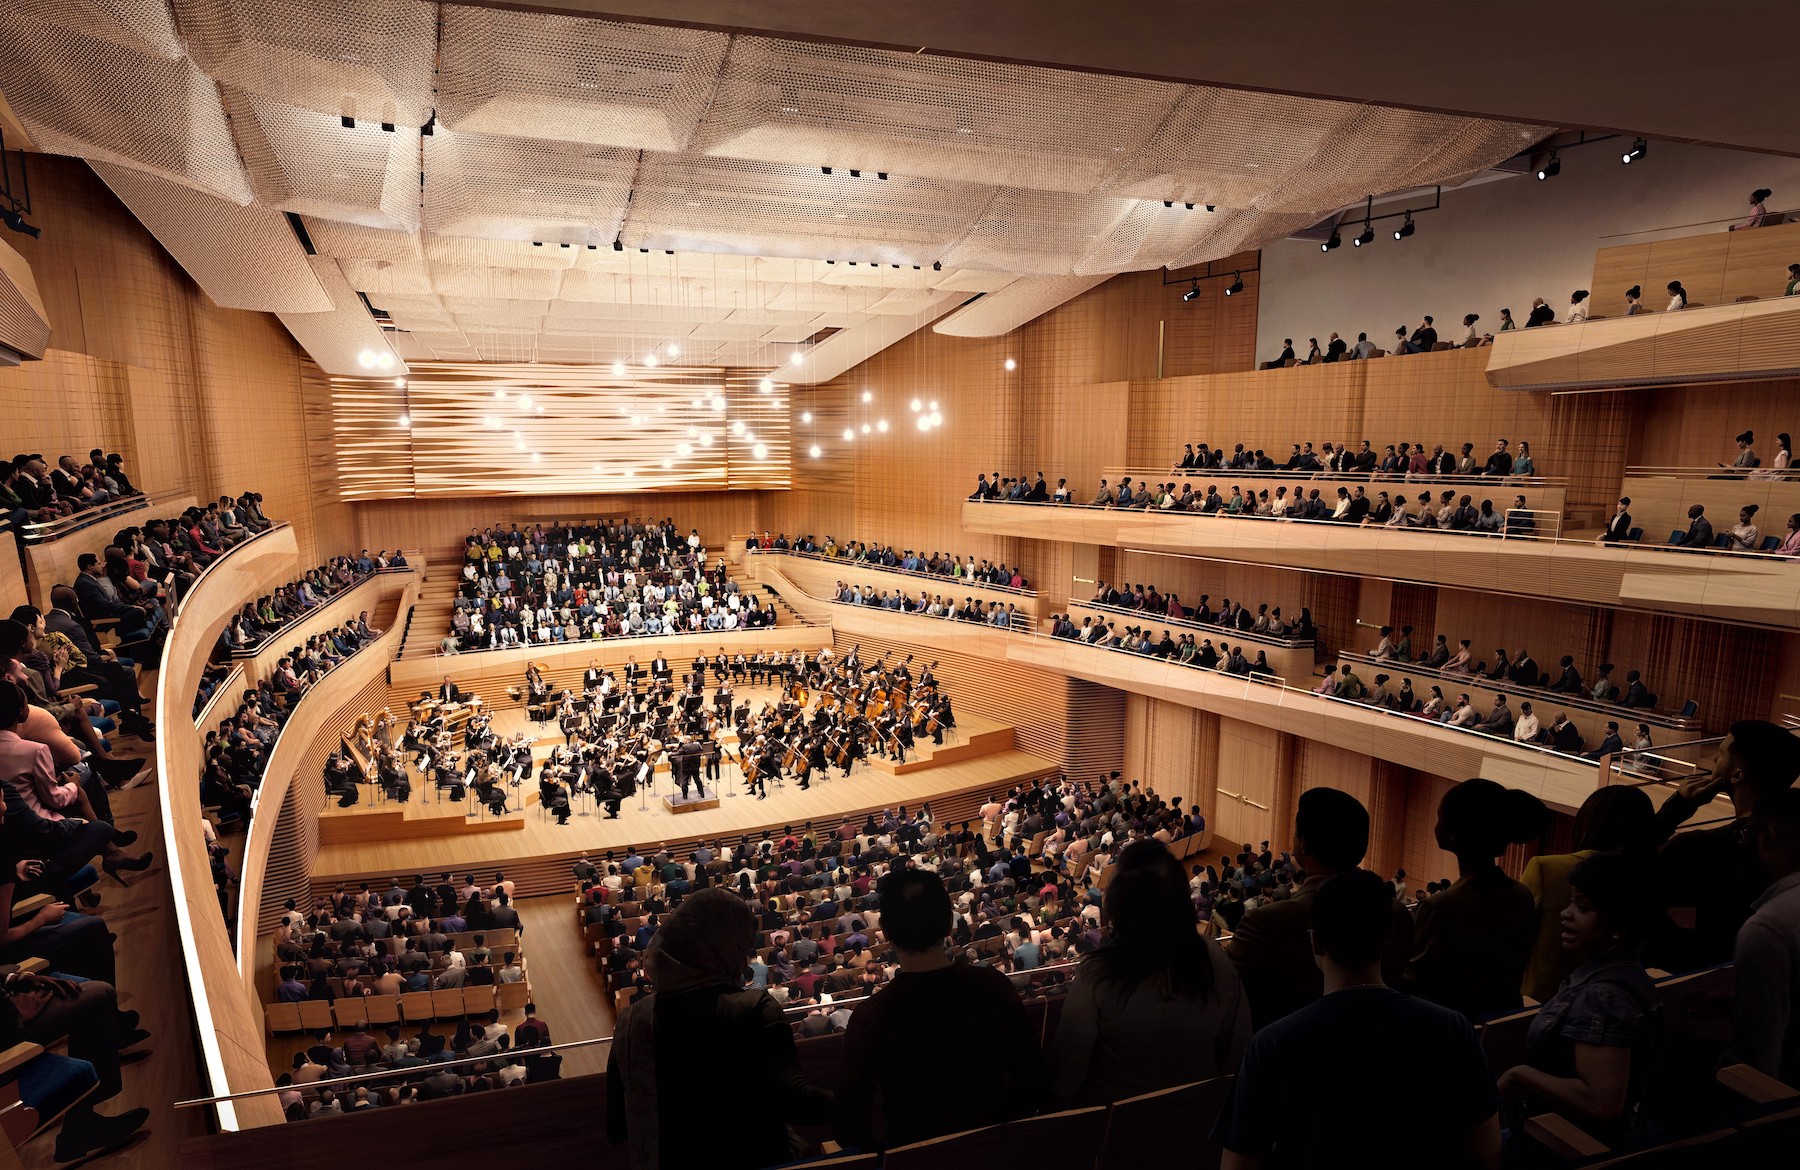 The reconstruction of David Geffen Hall allows the audience to be closer to the performers on stage. Image: Diamond Schmitt Architects